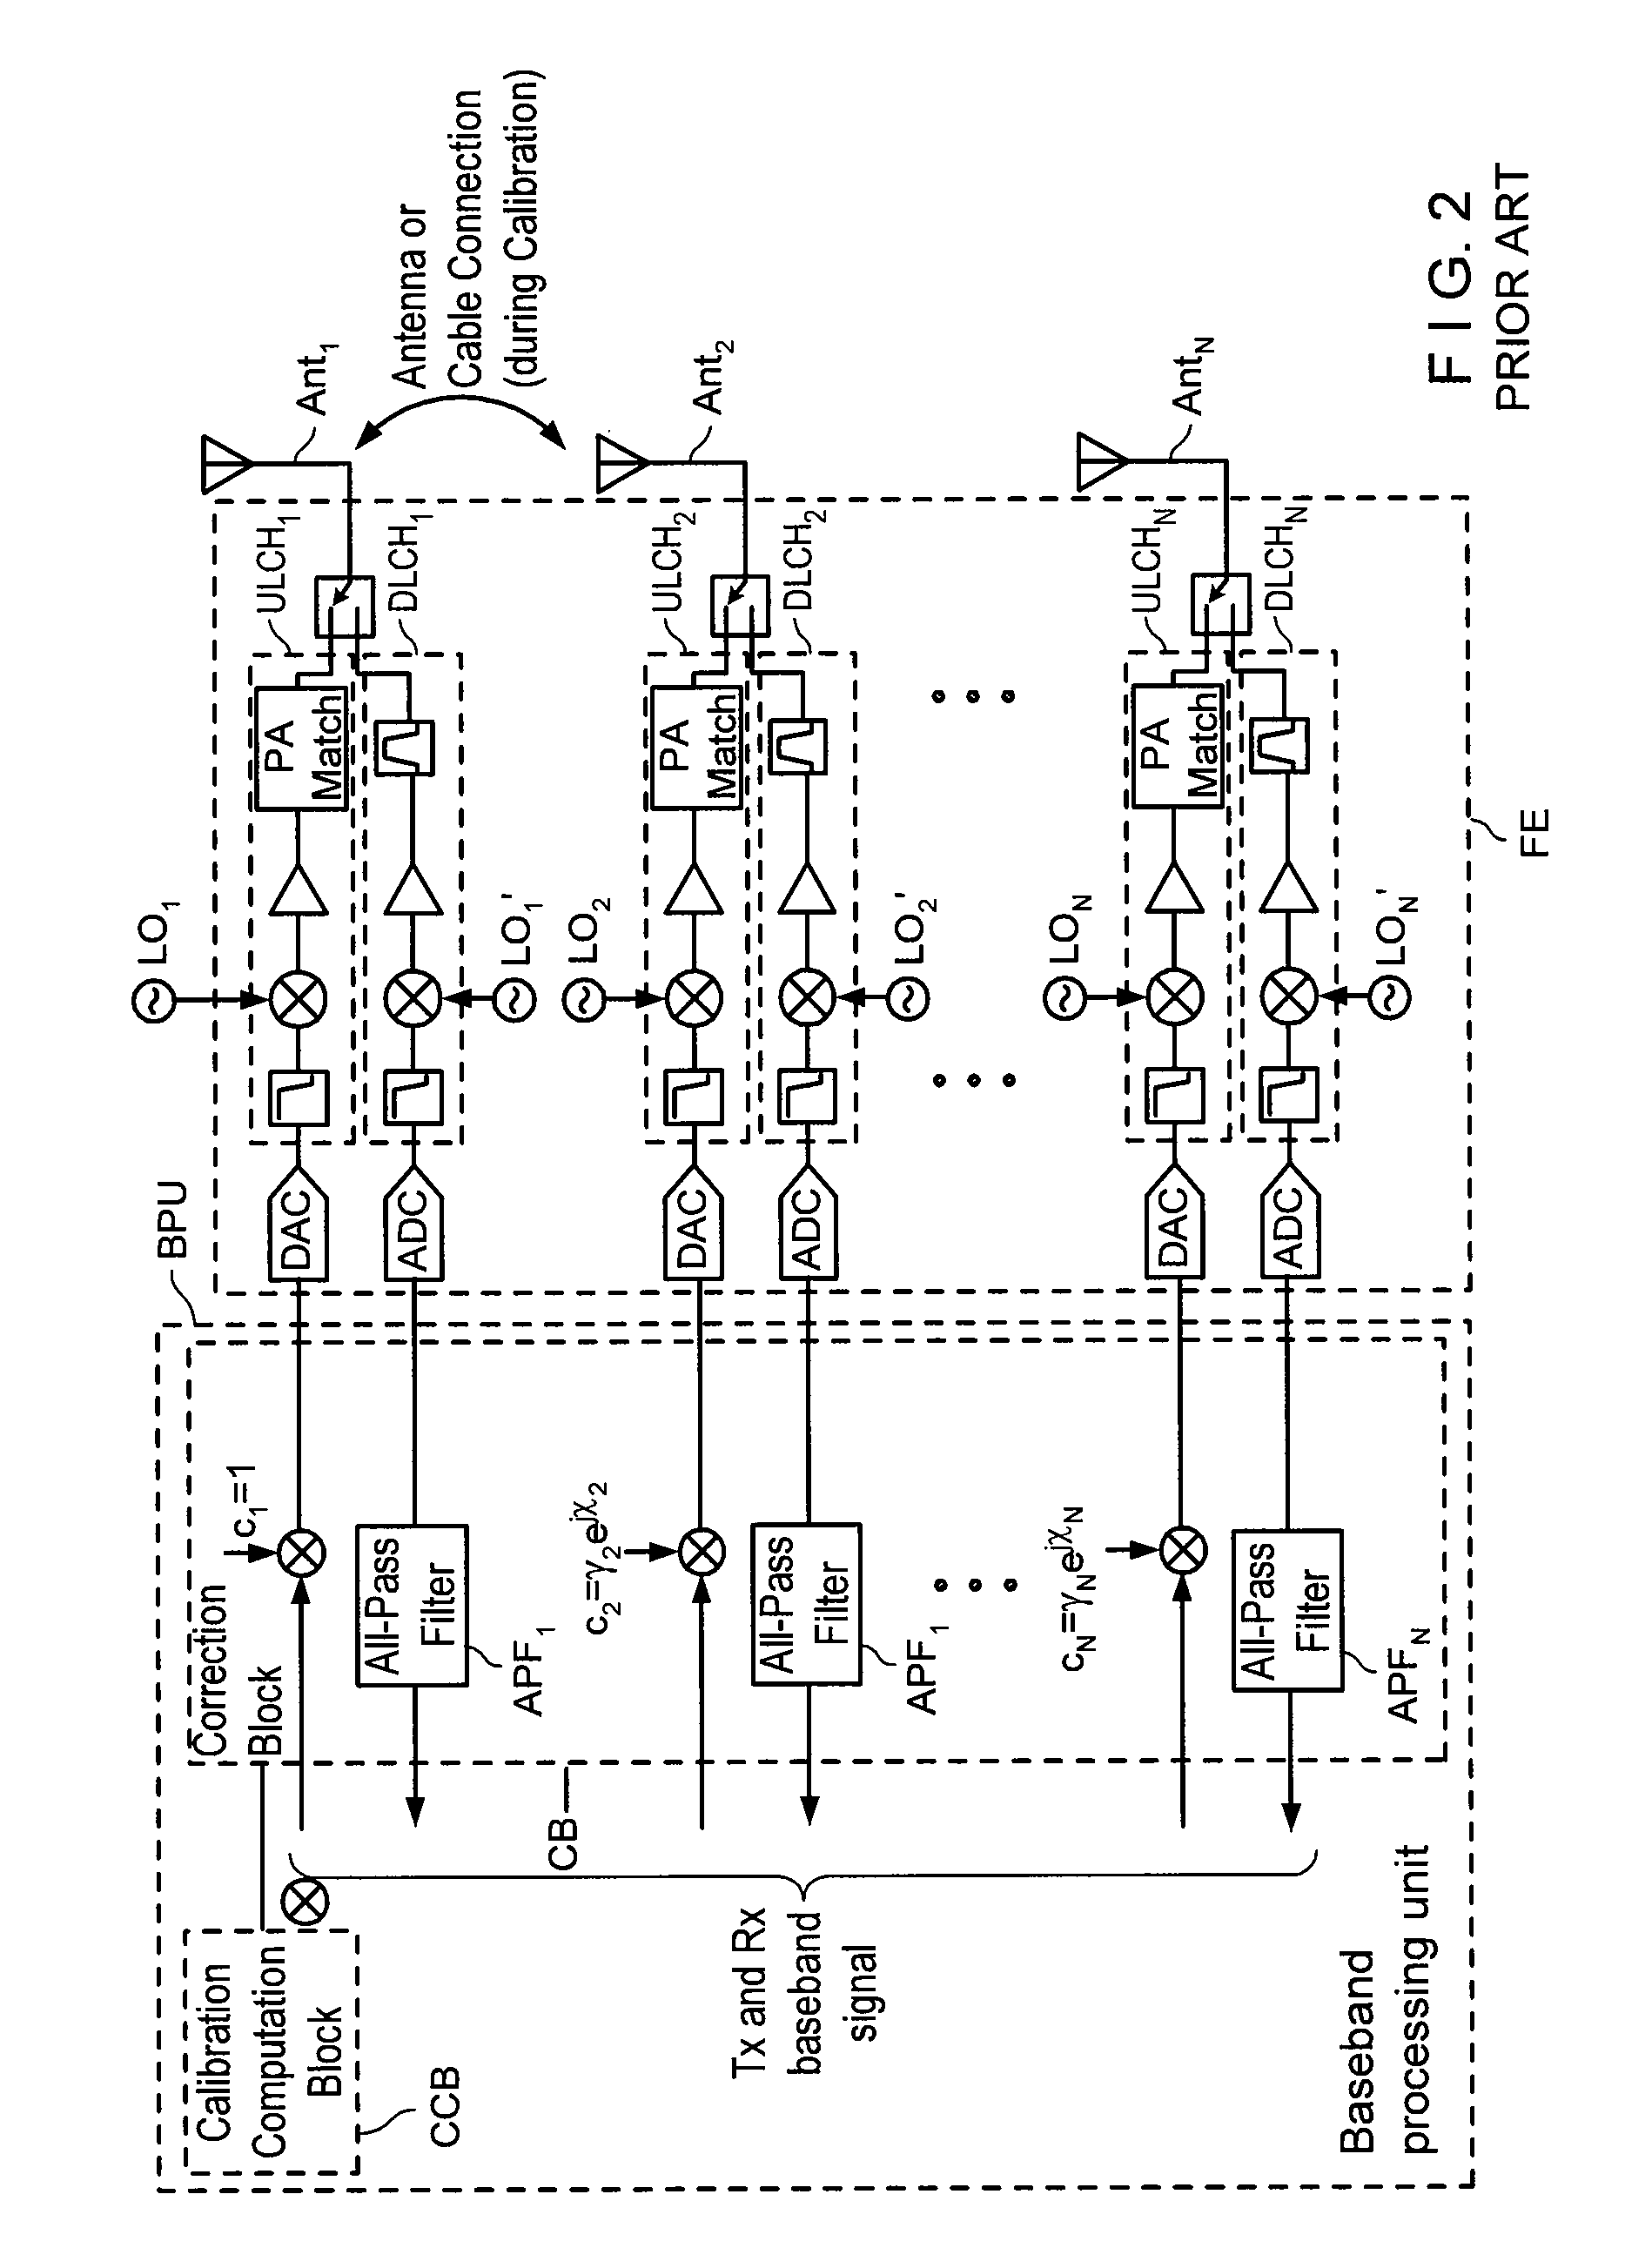 MULTI-TRANSCEIVER ARCHITECTURE FOR ADVANCED Tx ANTENNA MONITORING AND CALIBRATION IN MIMO AND SMART ANTENNA COMMUNICATION SYSTEMS